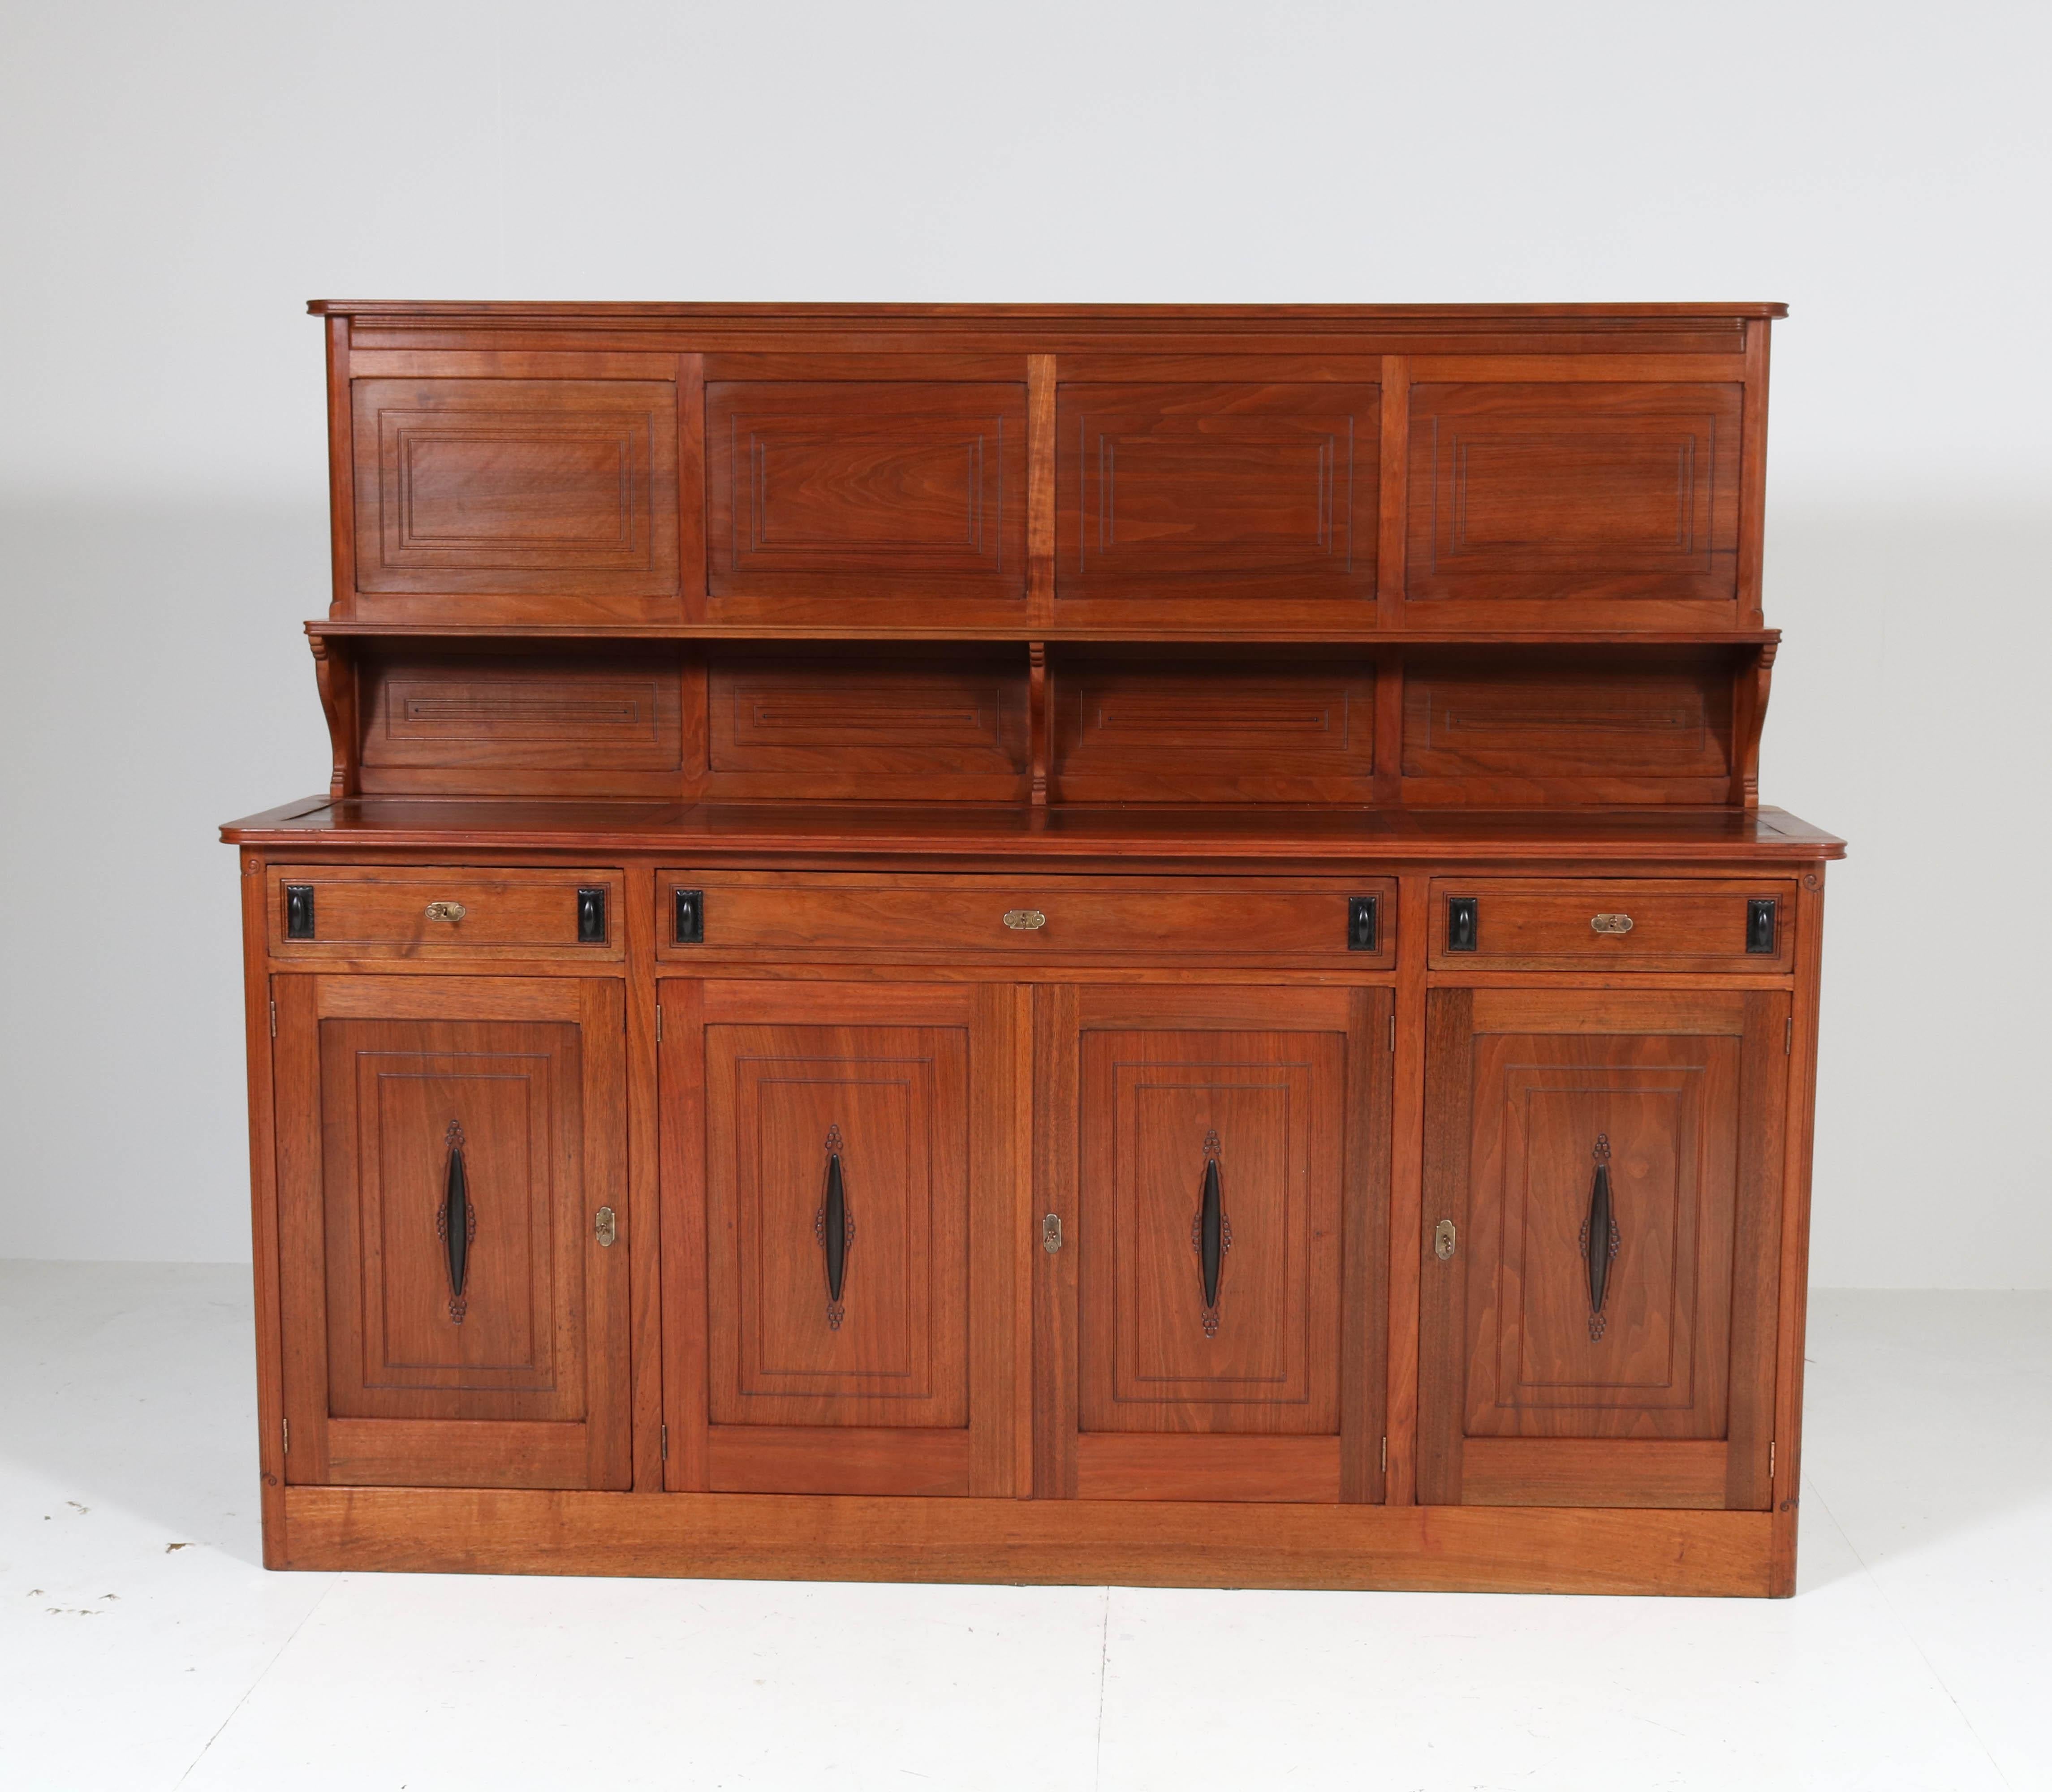 Important and very rare Art Deco Amsterdam School sideboard.
Design by Jac. van den Bosch for 't Binnenhuis Amsterdam.
This magnificent piece of furniture was custom made for the merchant Bernhard Israel Catz in 1914 for his estate in Amsterdam at